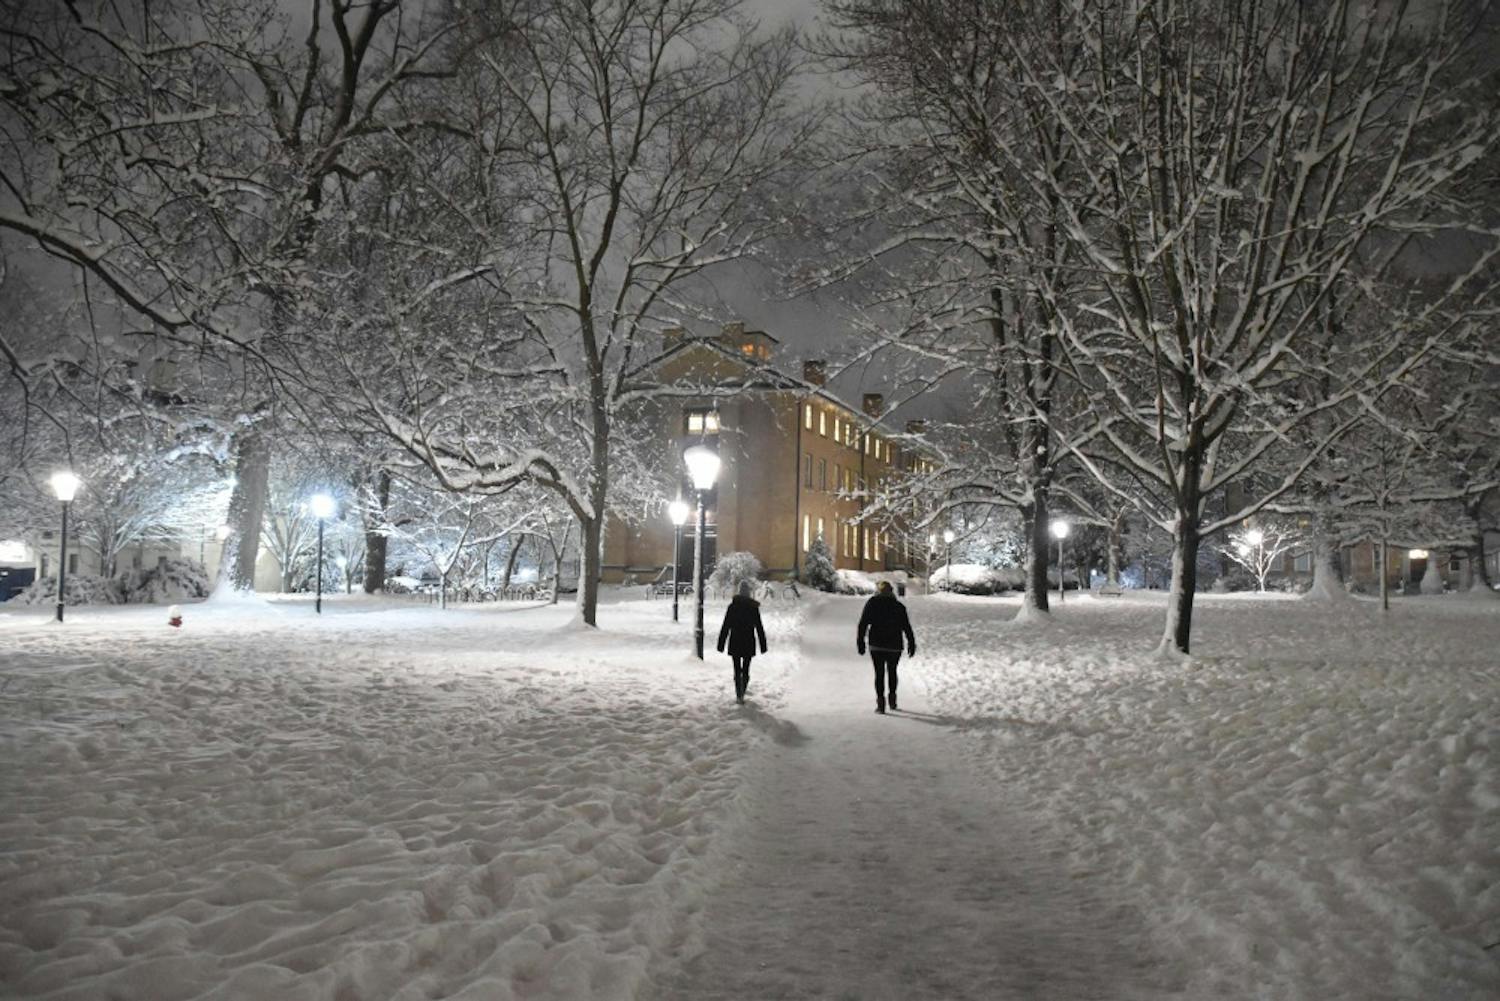 People walk through snowy North Campus on a Wednesday night in 2018.